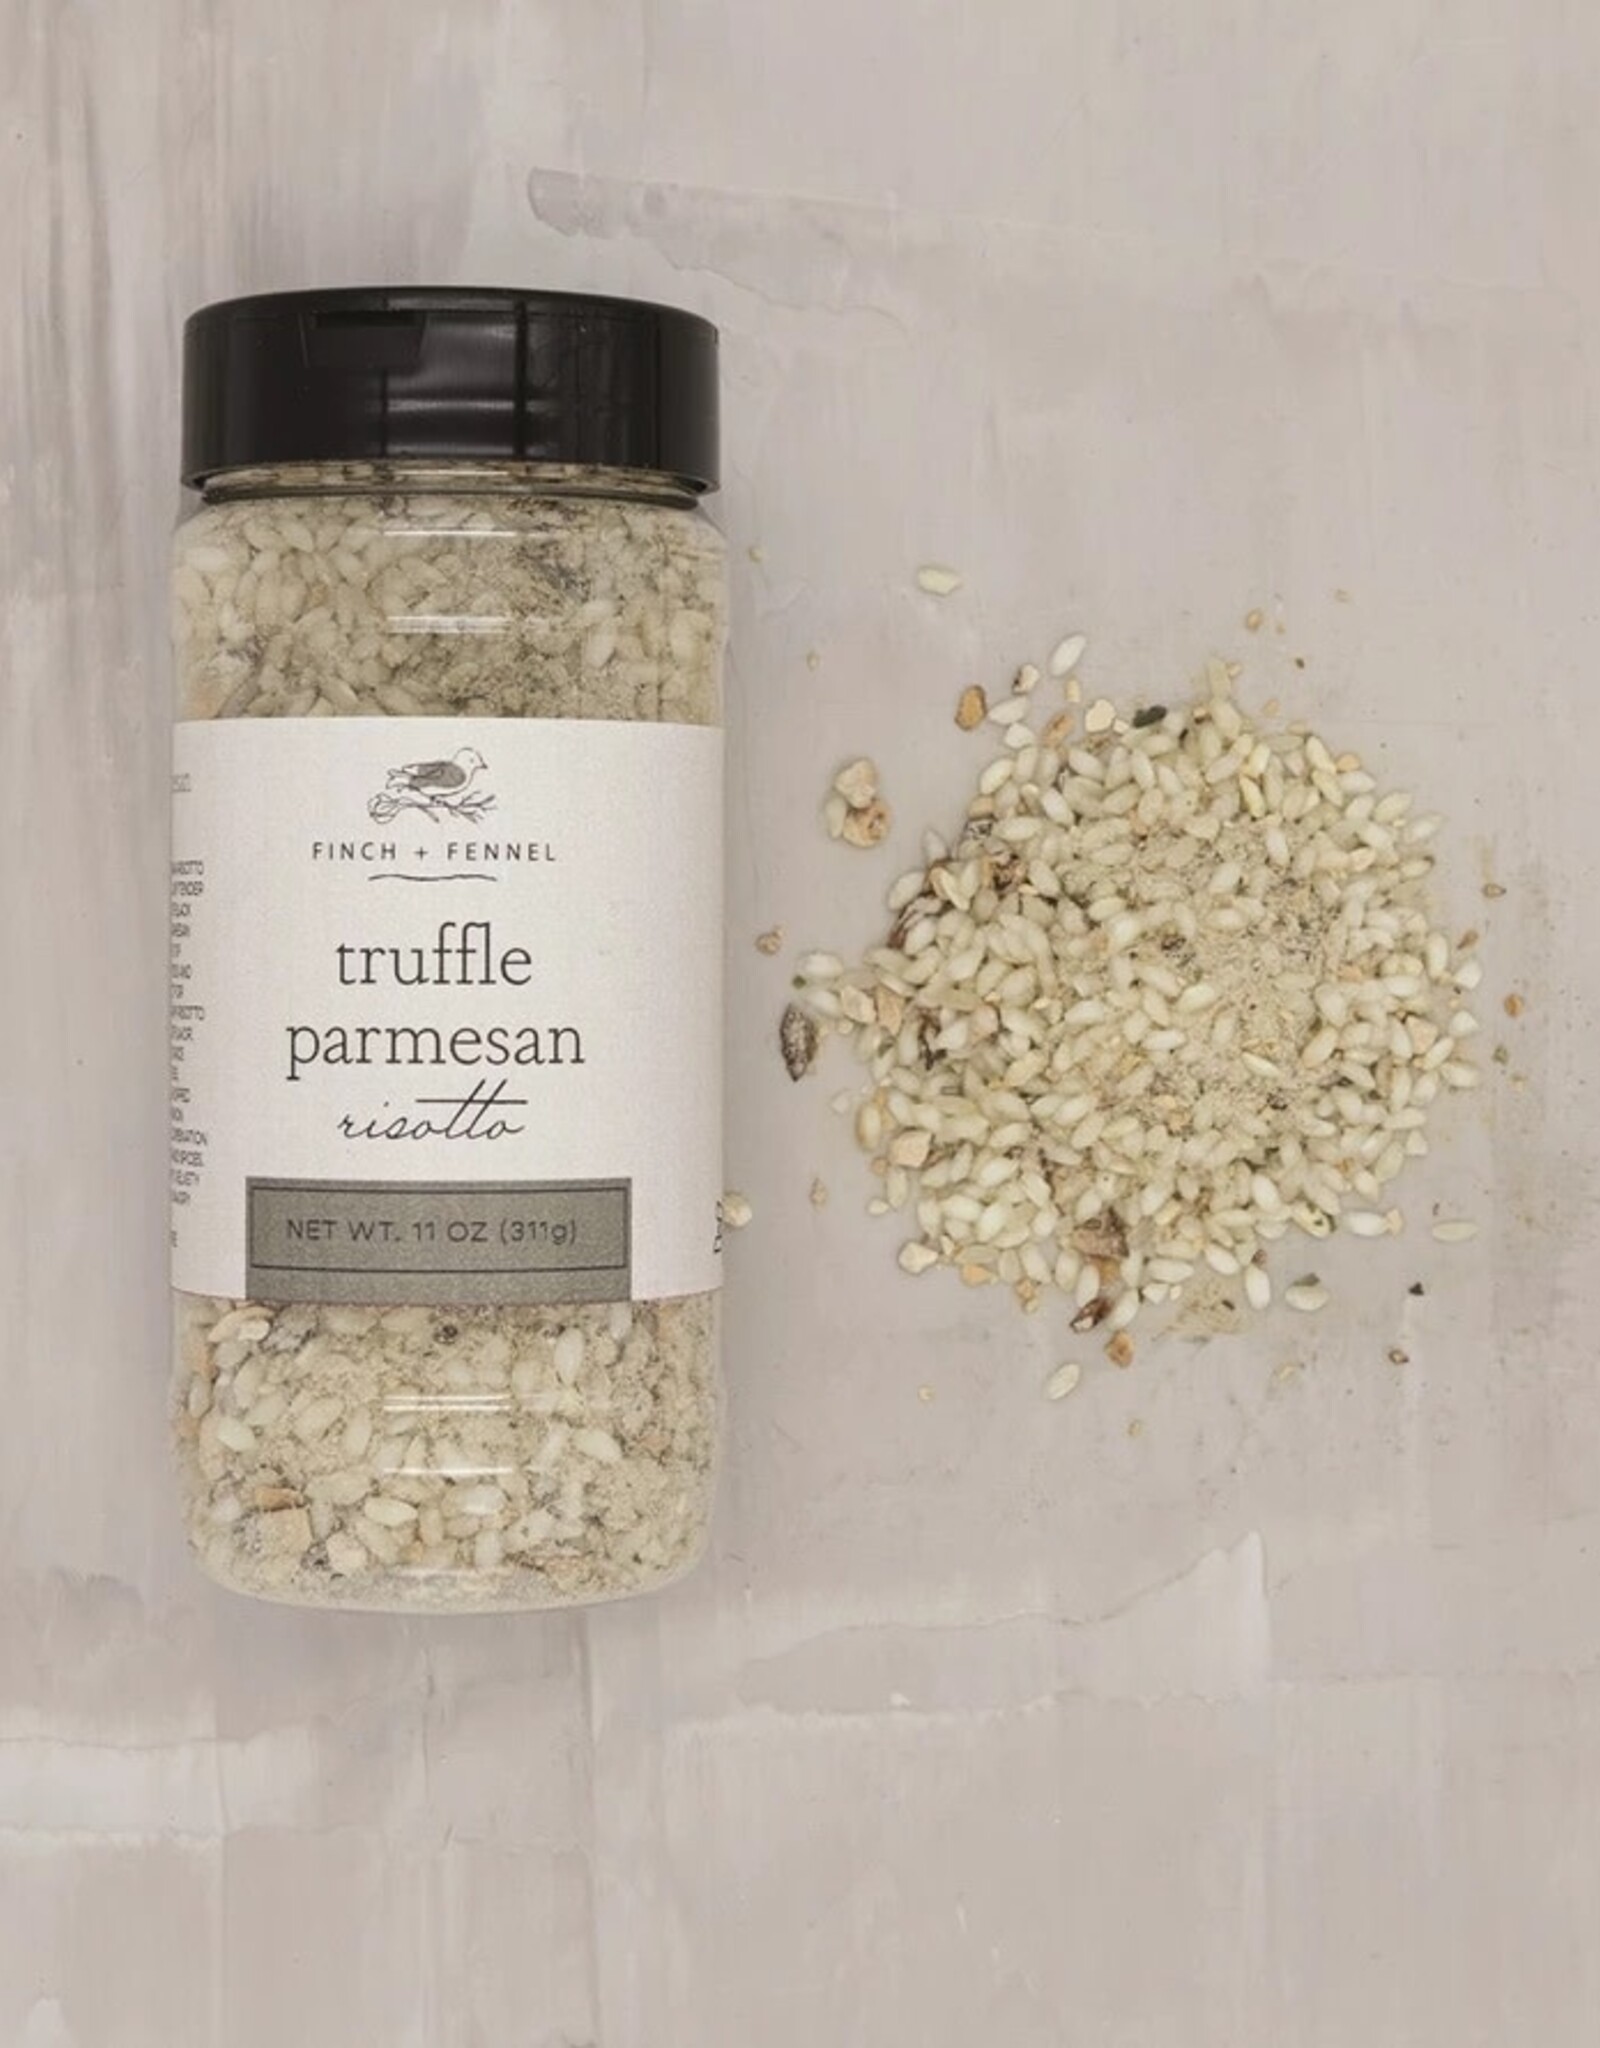 Creative Coop TRUFFLE PARMESAN RISOTTO - Finch + Fennel